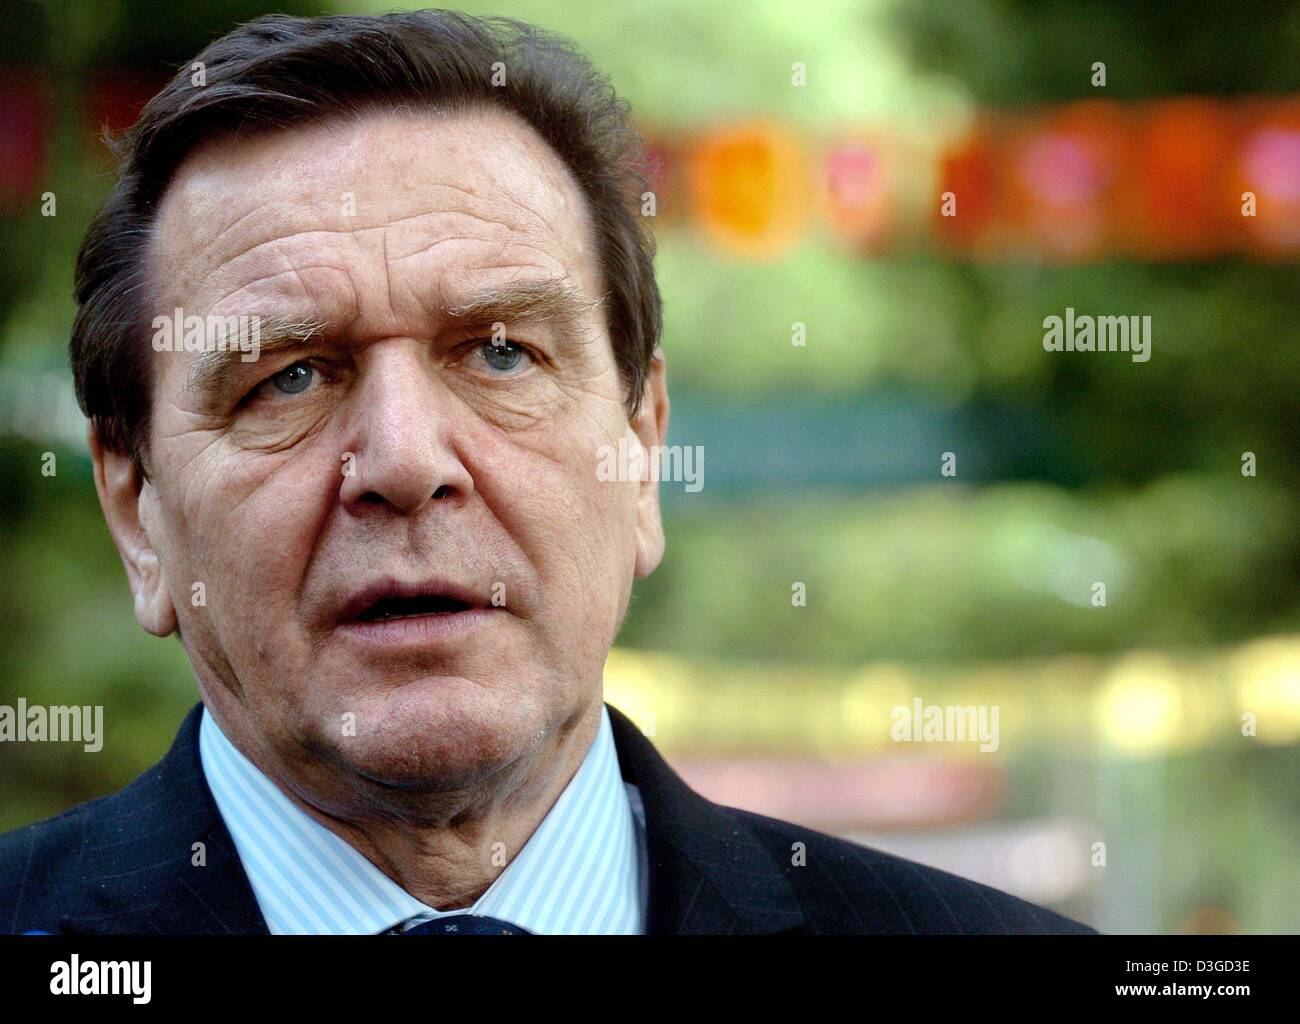 (dpa) - German Chancellor Gerhard Schroeder comments on the new bomb attempts in the Afghan capital Kabul on the sidelines of the 5th Asia Europe Meeting (ASEM 5) in Hanoi, Vietnam, Friday, 8 October 2004. German Chancellor Gerhard Schroeder said Friday he plans to stick with his plans to travel to Afghanistan, despite a rocket explosion just a few metres from the German embassy in Stock Photo